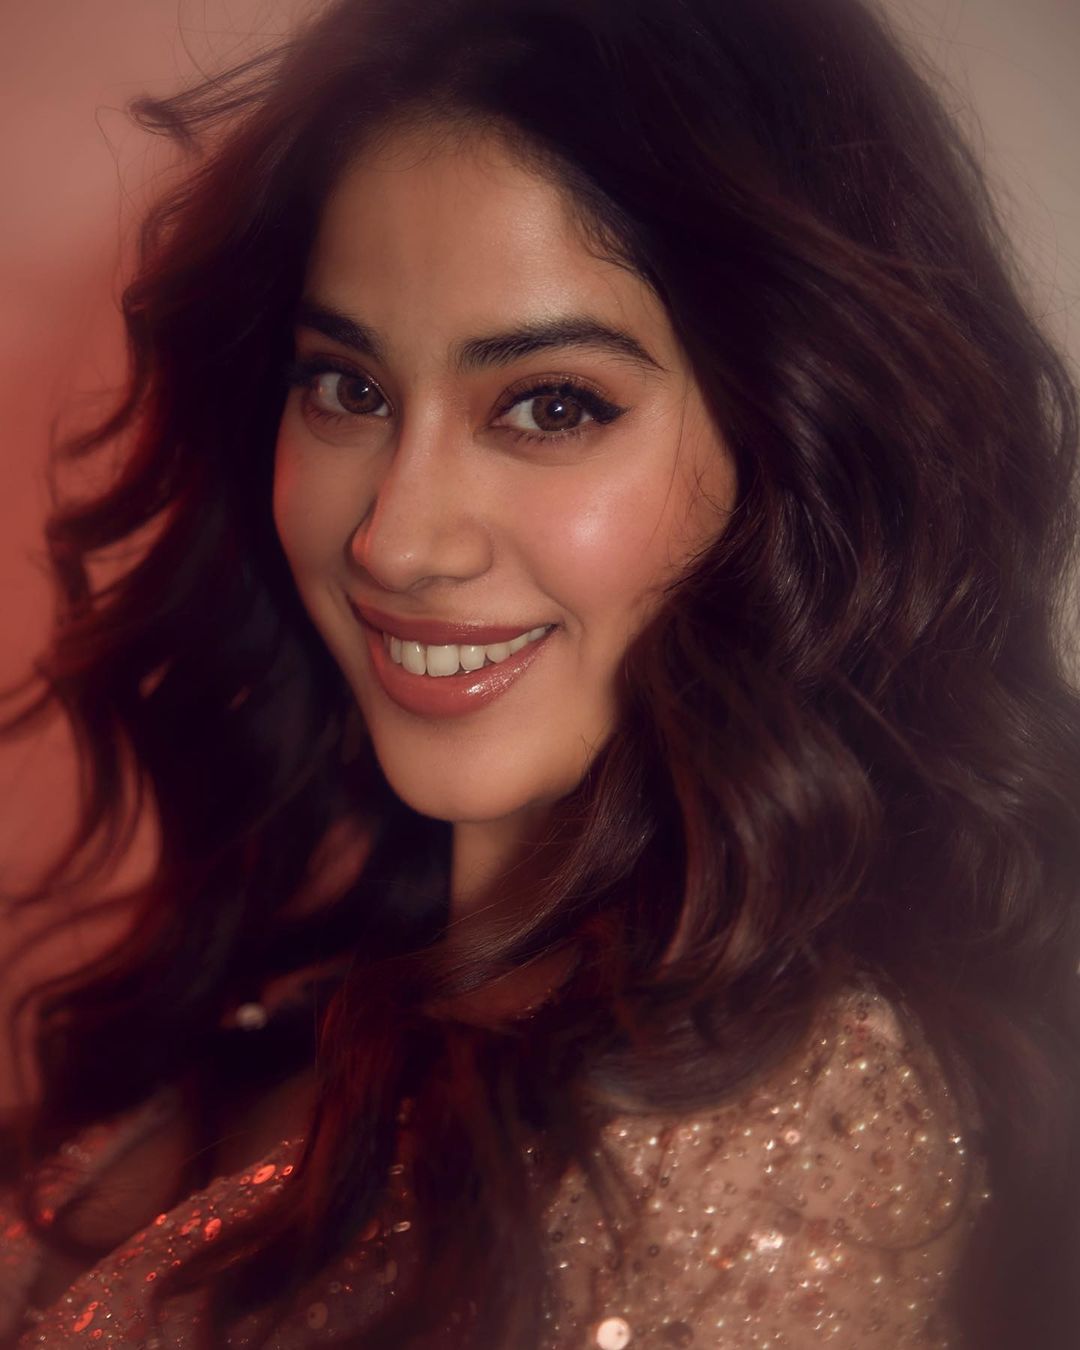 Janhvi Kapoor rounds off her entire look with perfectly-lined eyeliner, glossy lips and blushed cheeks